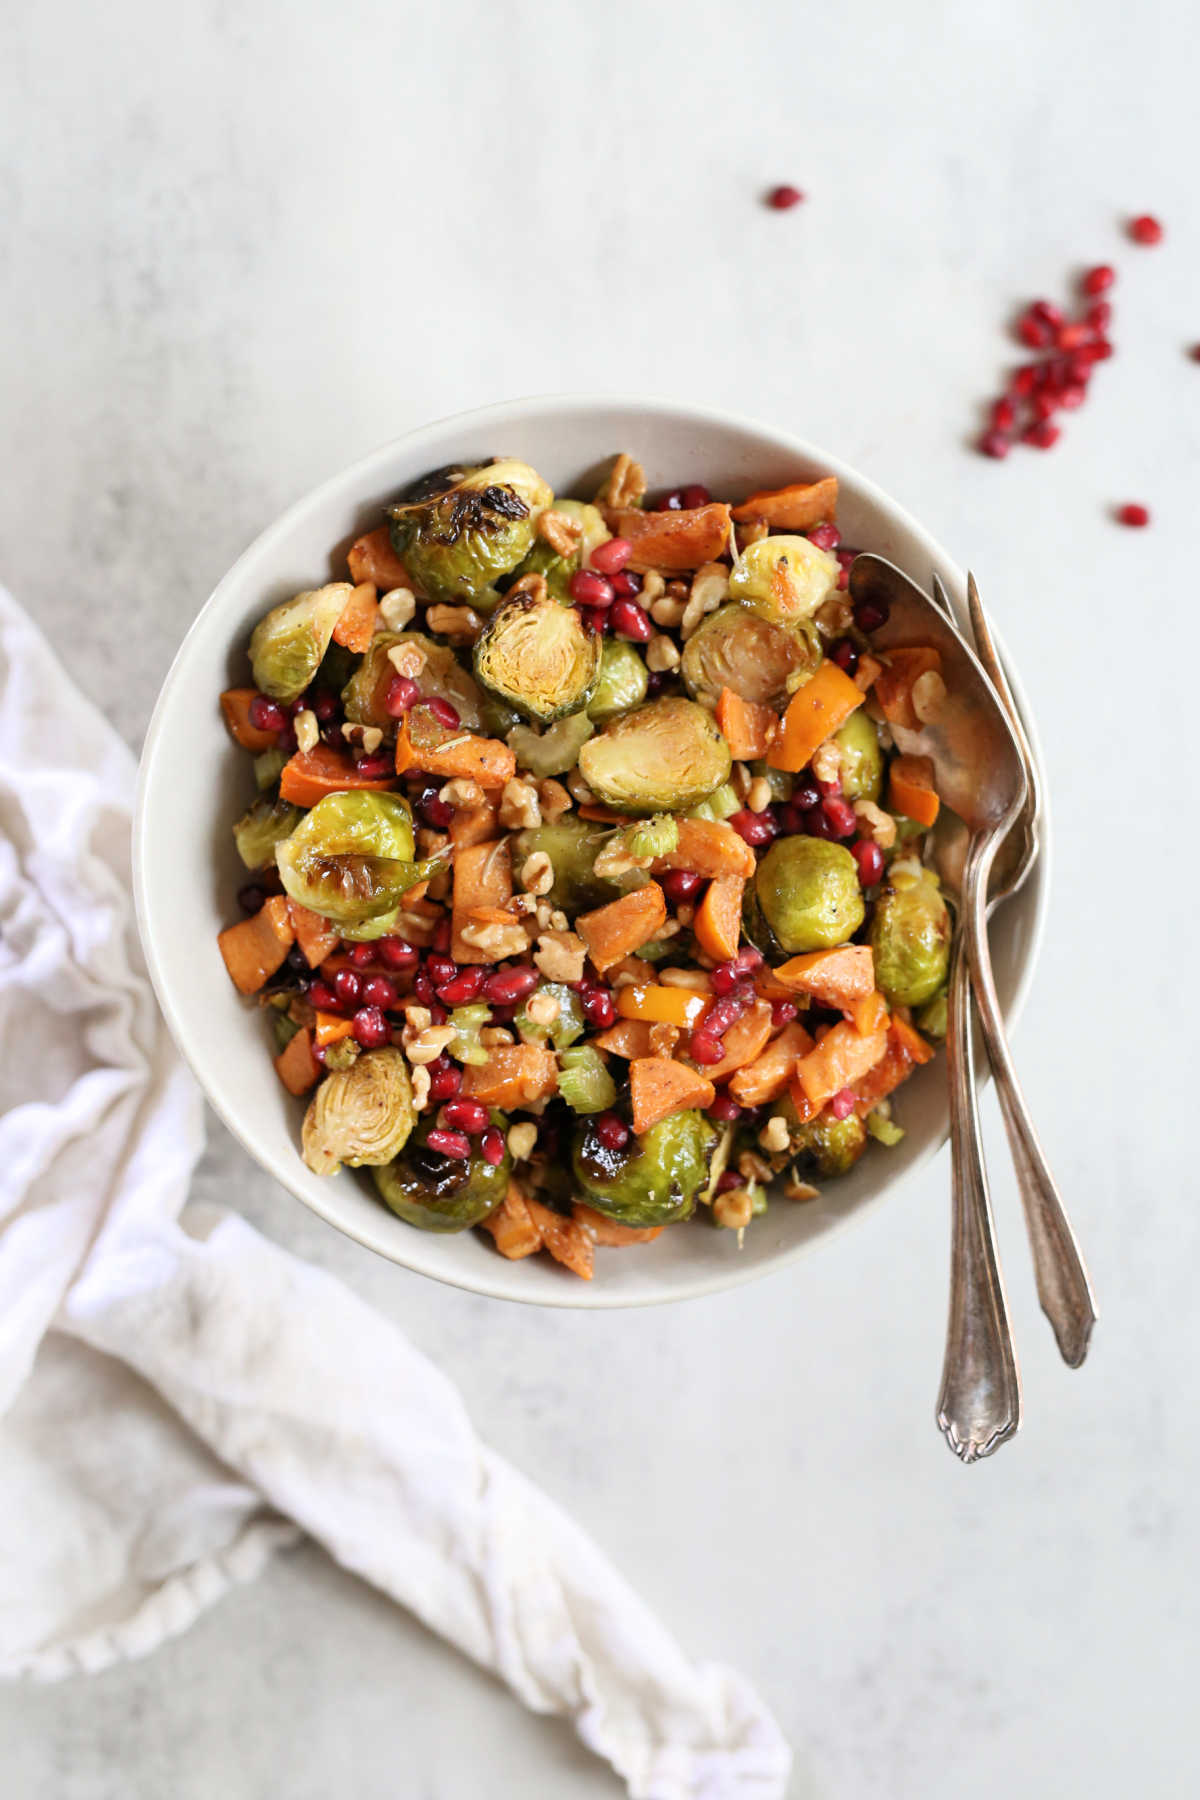 roasted brussels sprouts salad recipe in a bowl with serving spoons and a dish towel next to it